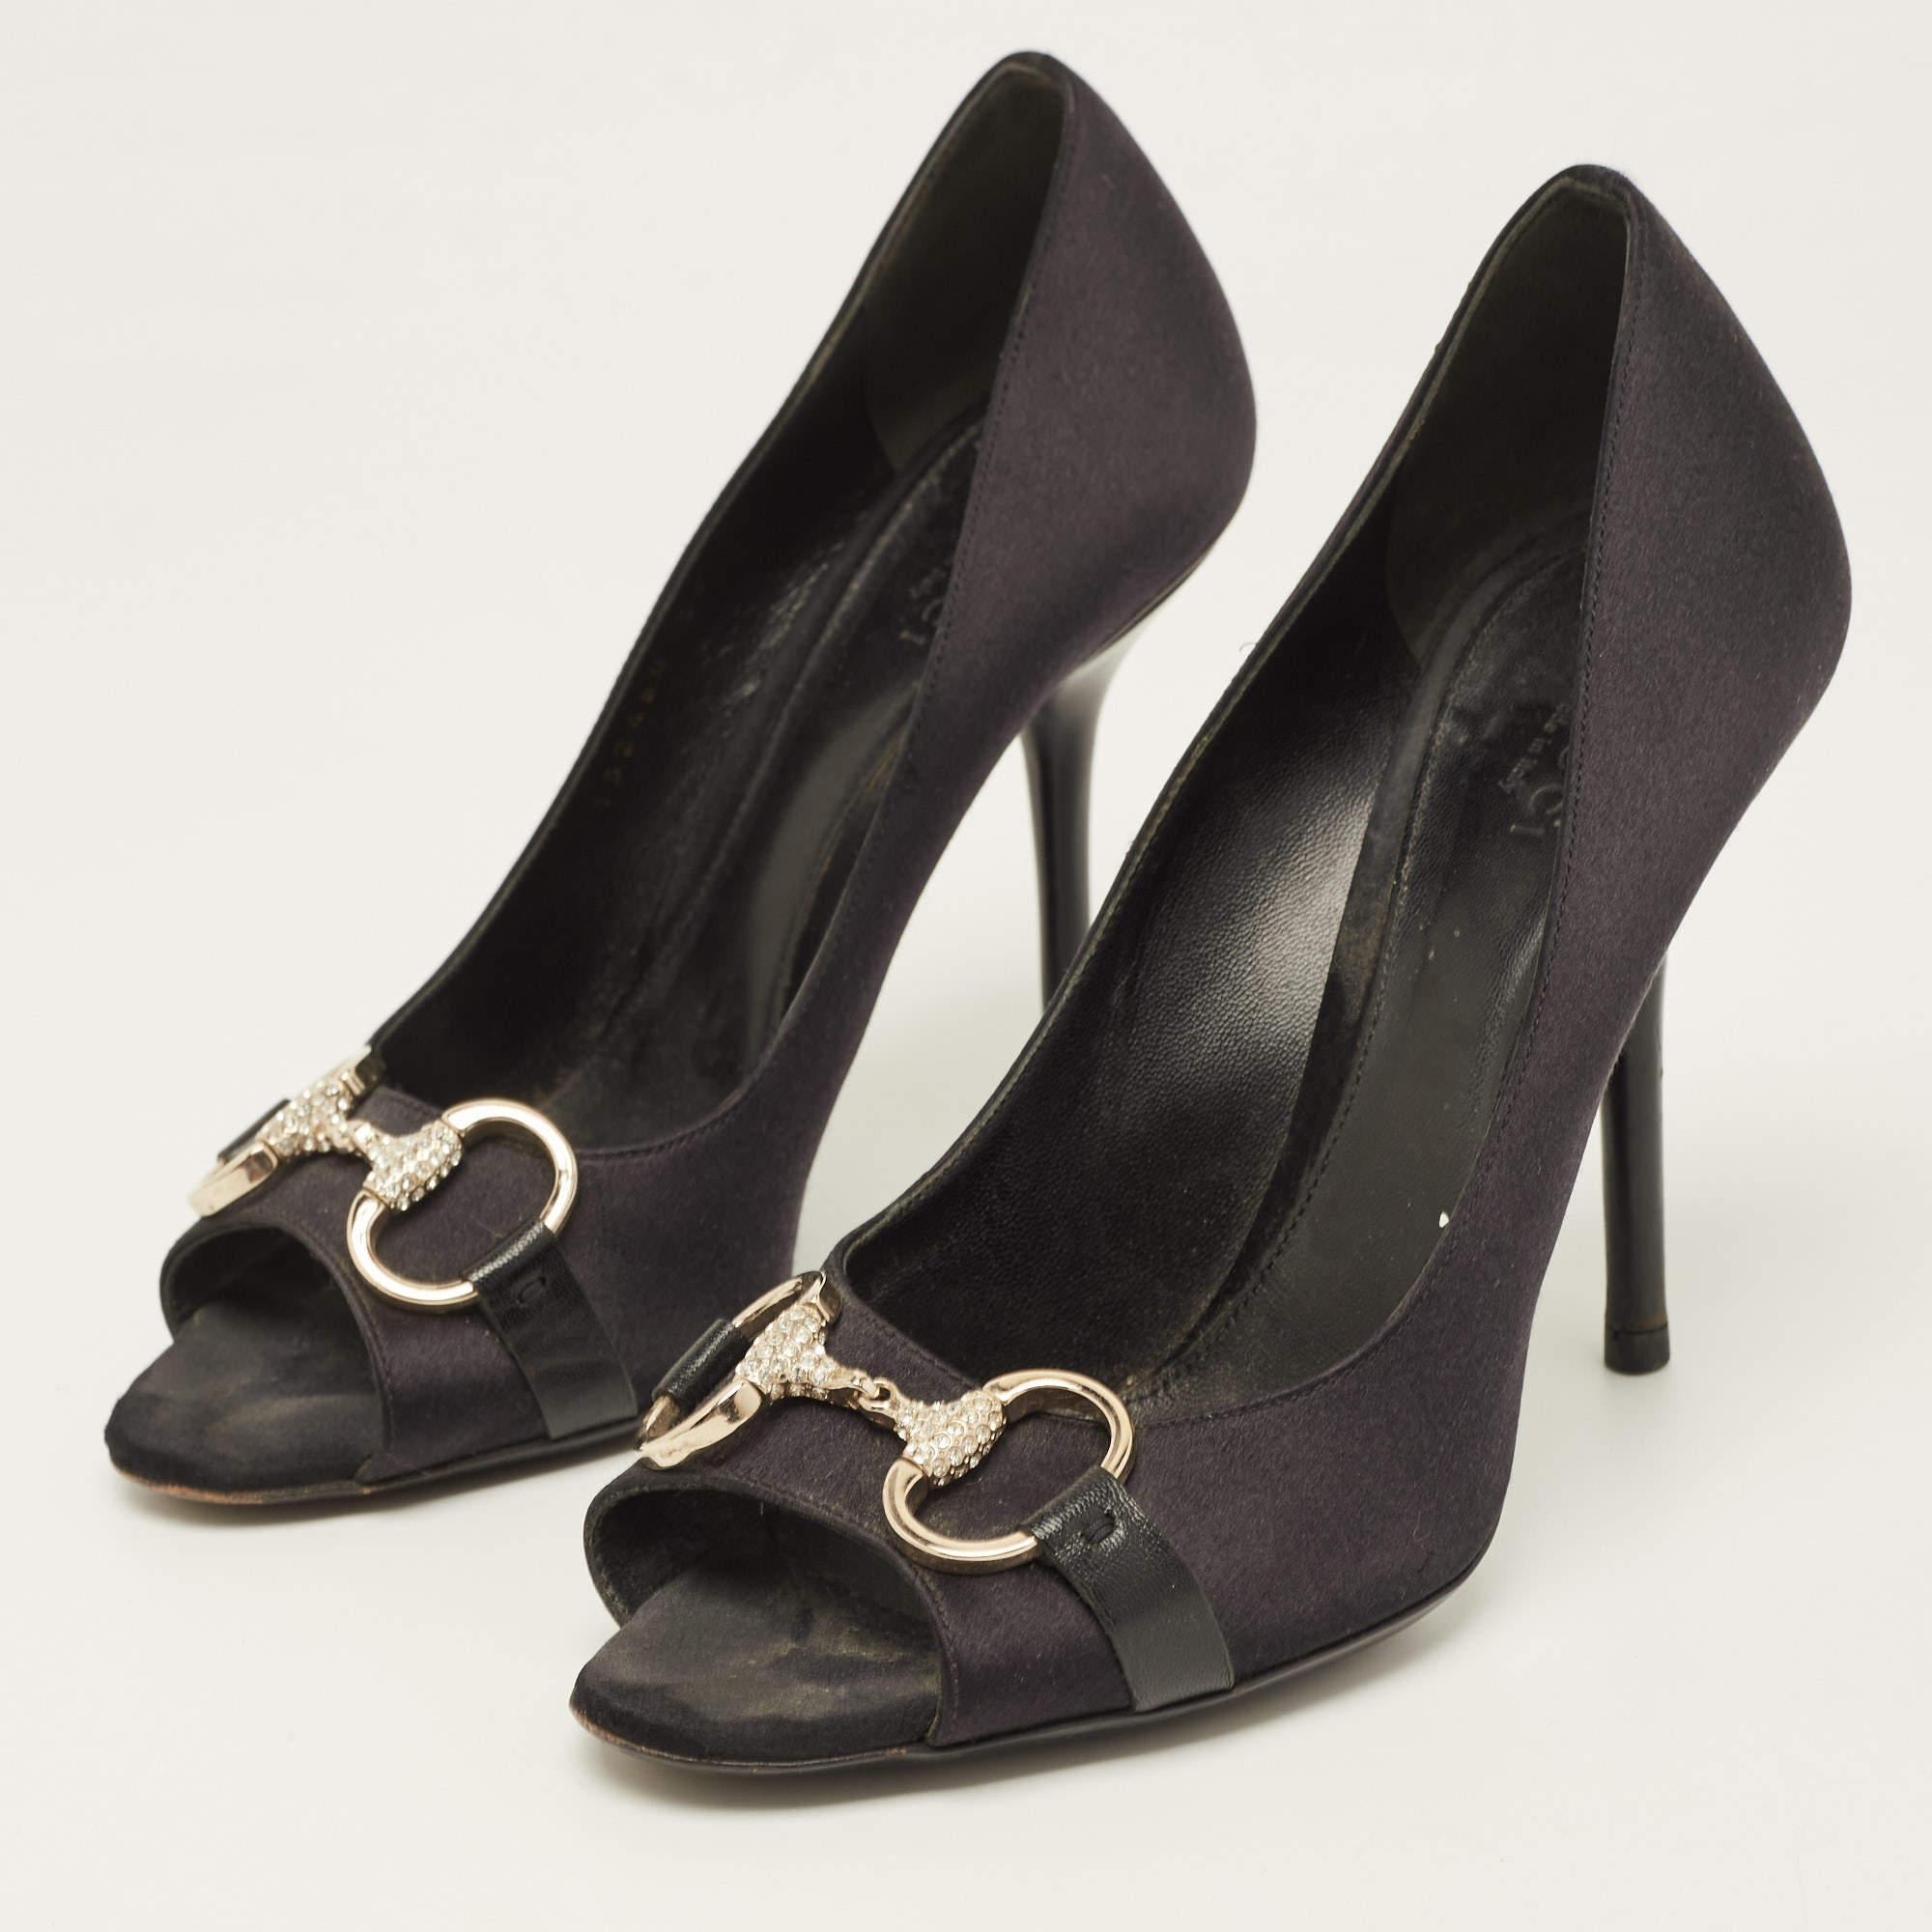 Wonderfully crafted shoes added with notable elements to fit well and pair perfectly with all your plans. Make these Gucci black pumps yours today!

